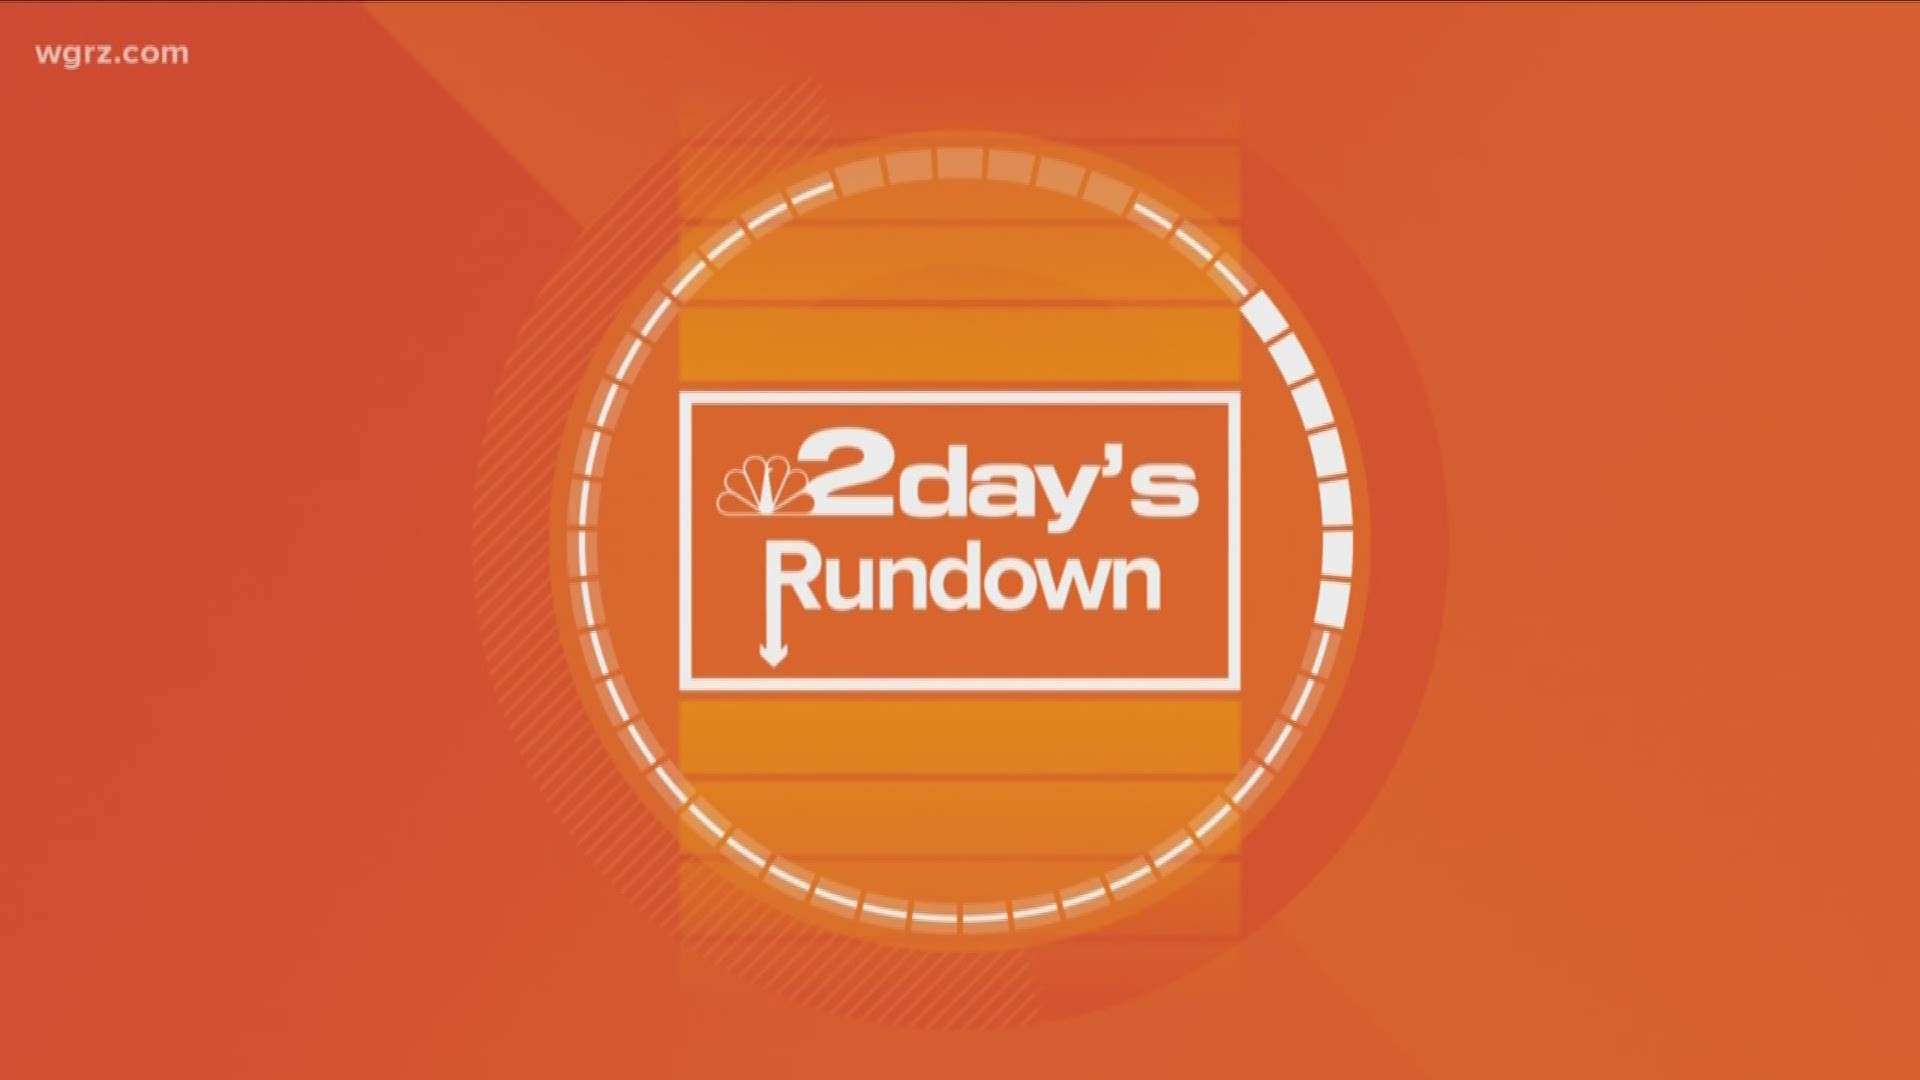 2day's Rundown: Top stories for 08/10/18